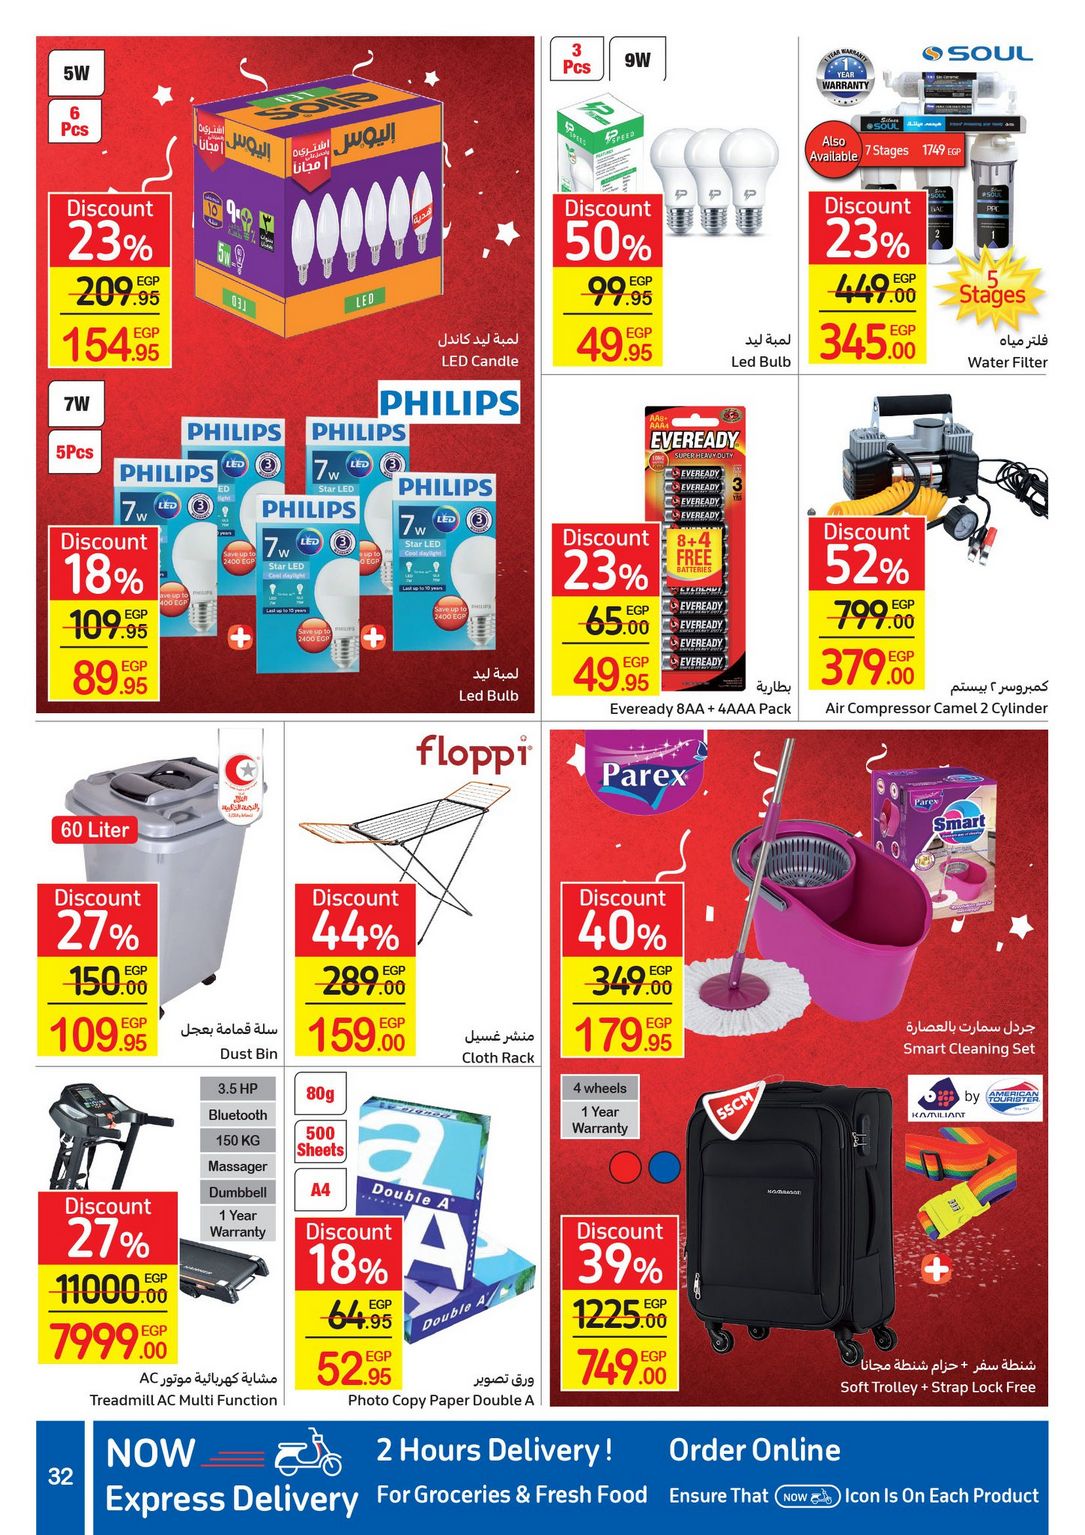 Carrefour Anniversary Offers till 18/2/2021 | Carrefour Egypt 34